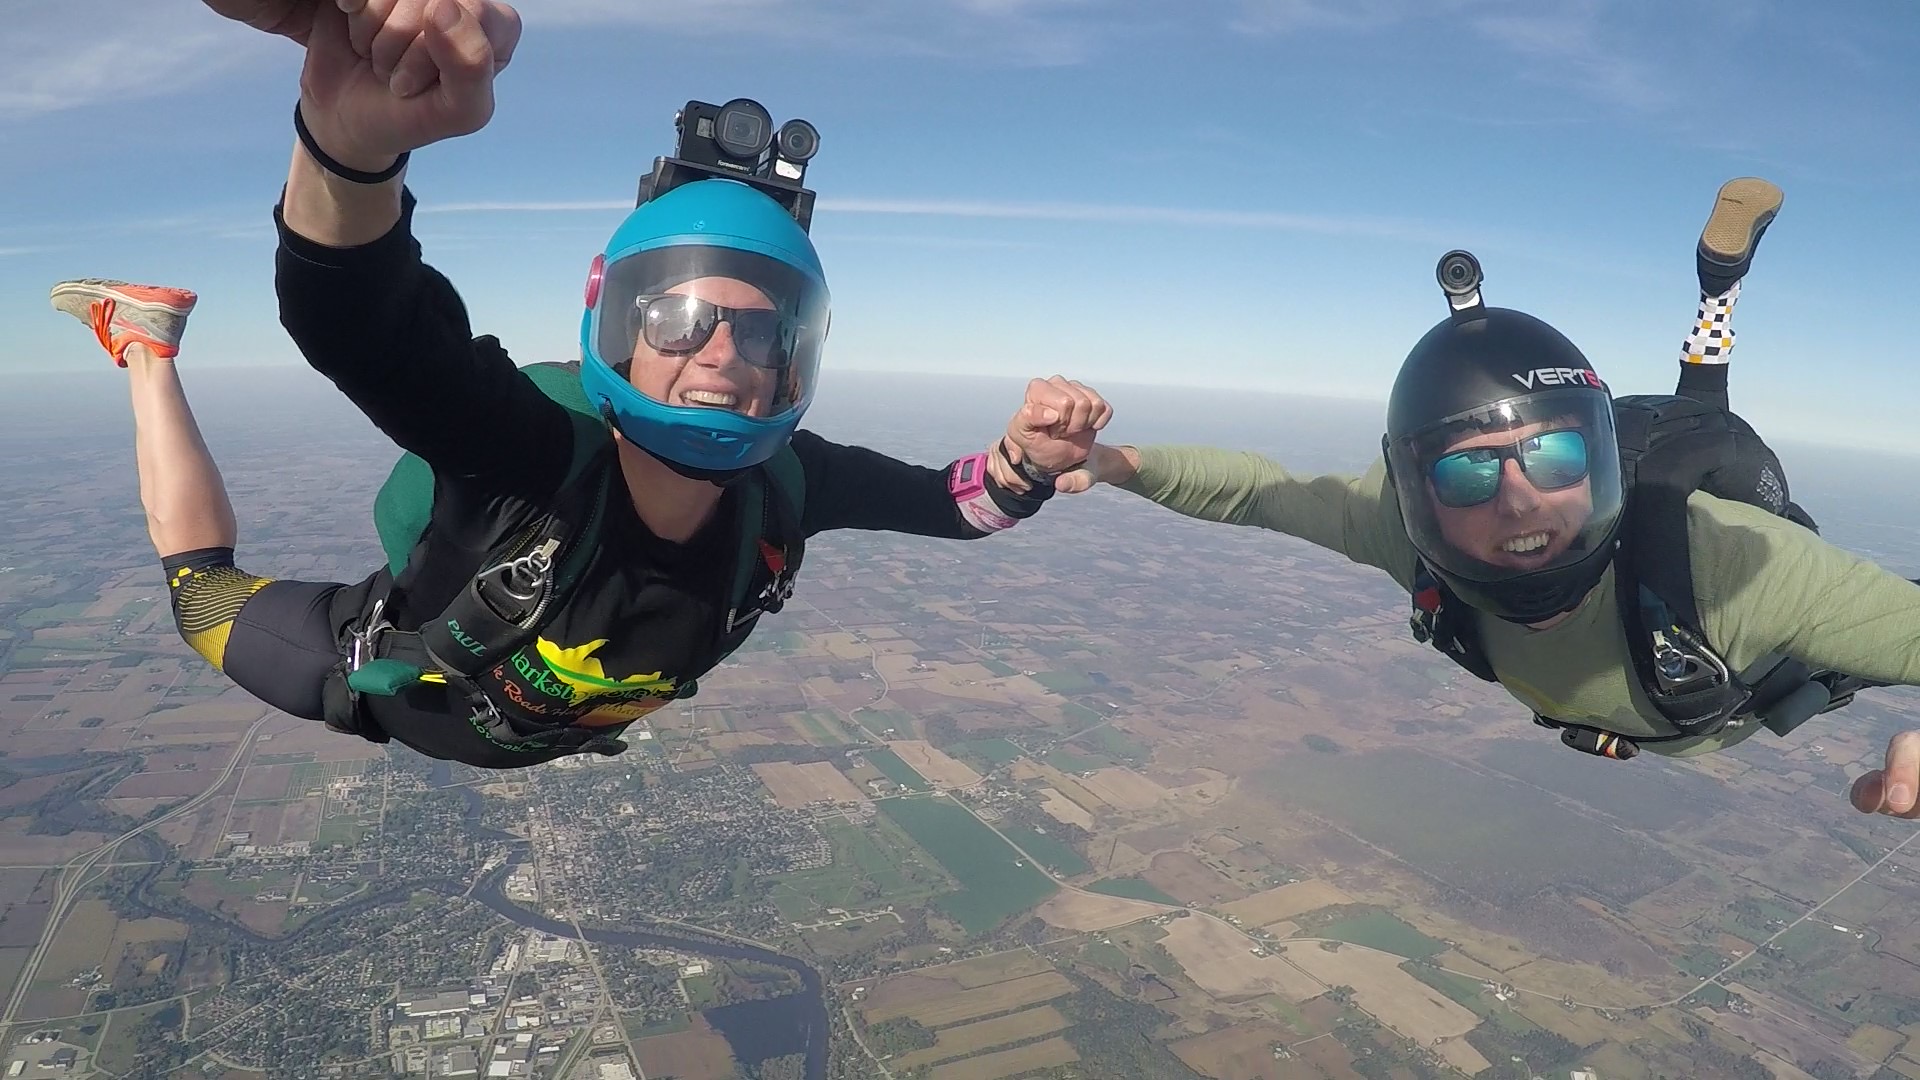 Woman solo skydiving with friends after training at Wisconsin Skydiving Center near Madison, WI